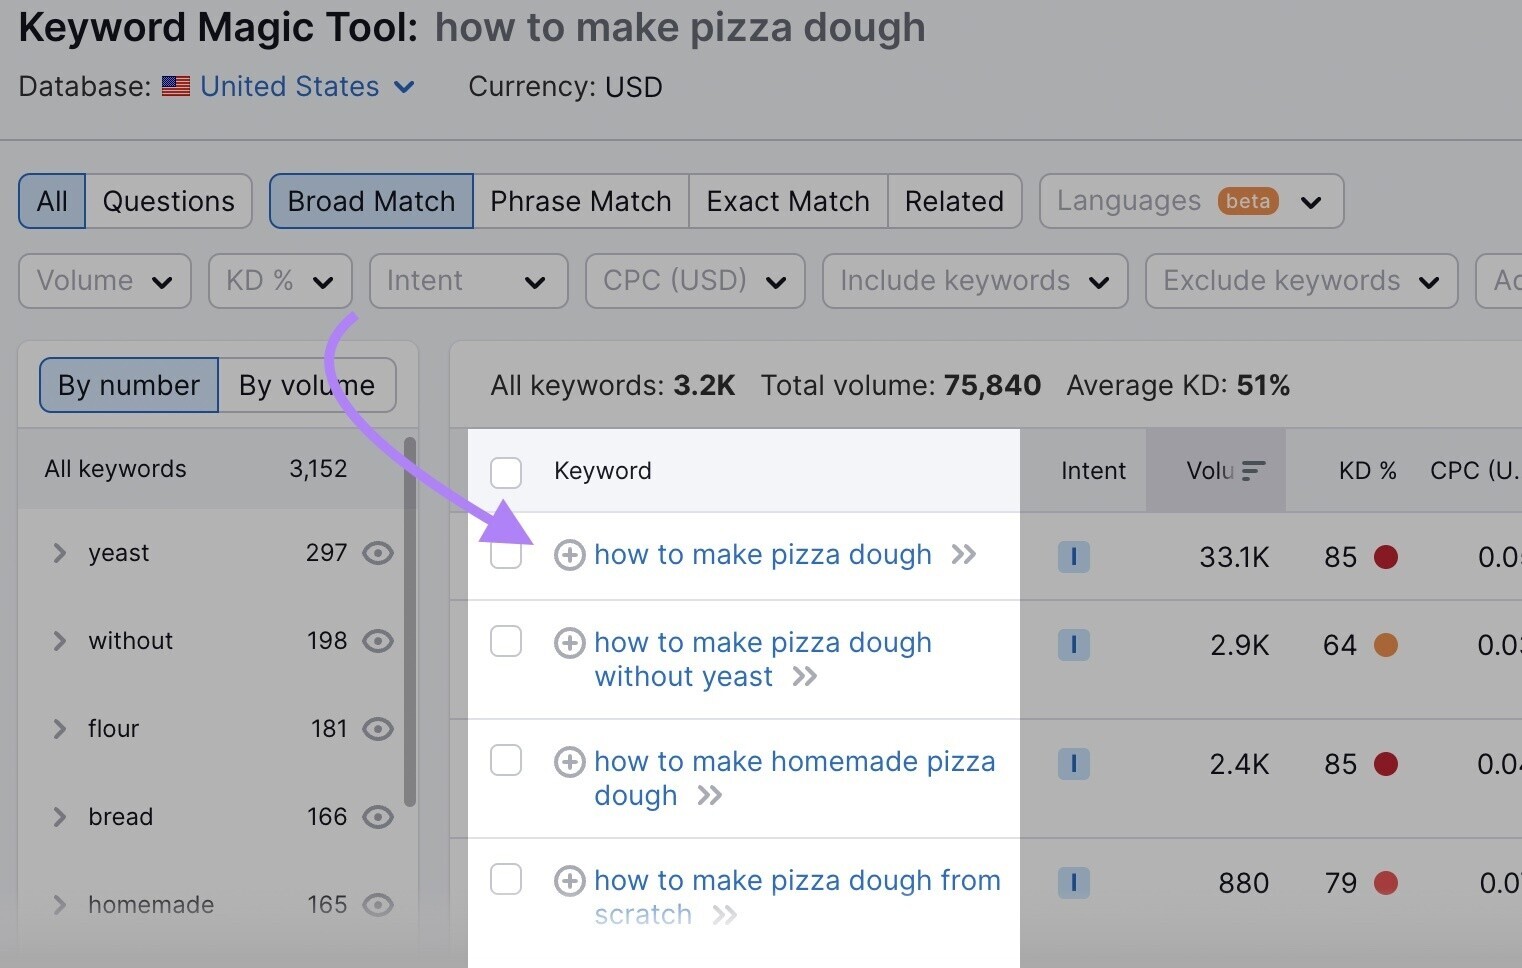 “Broad Match” results for “how to make pizza dough” in